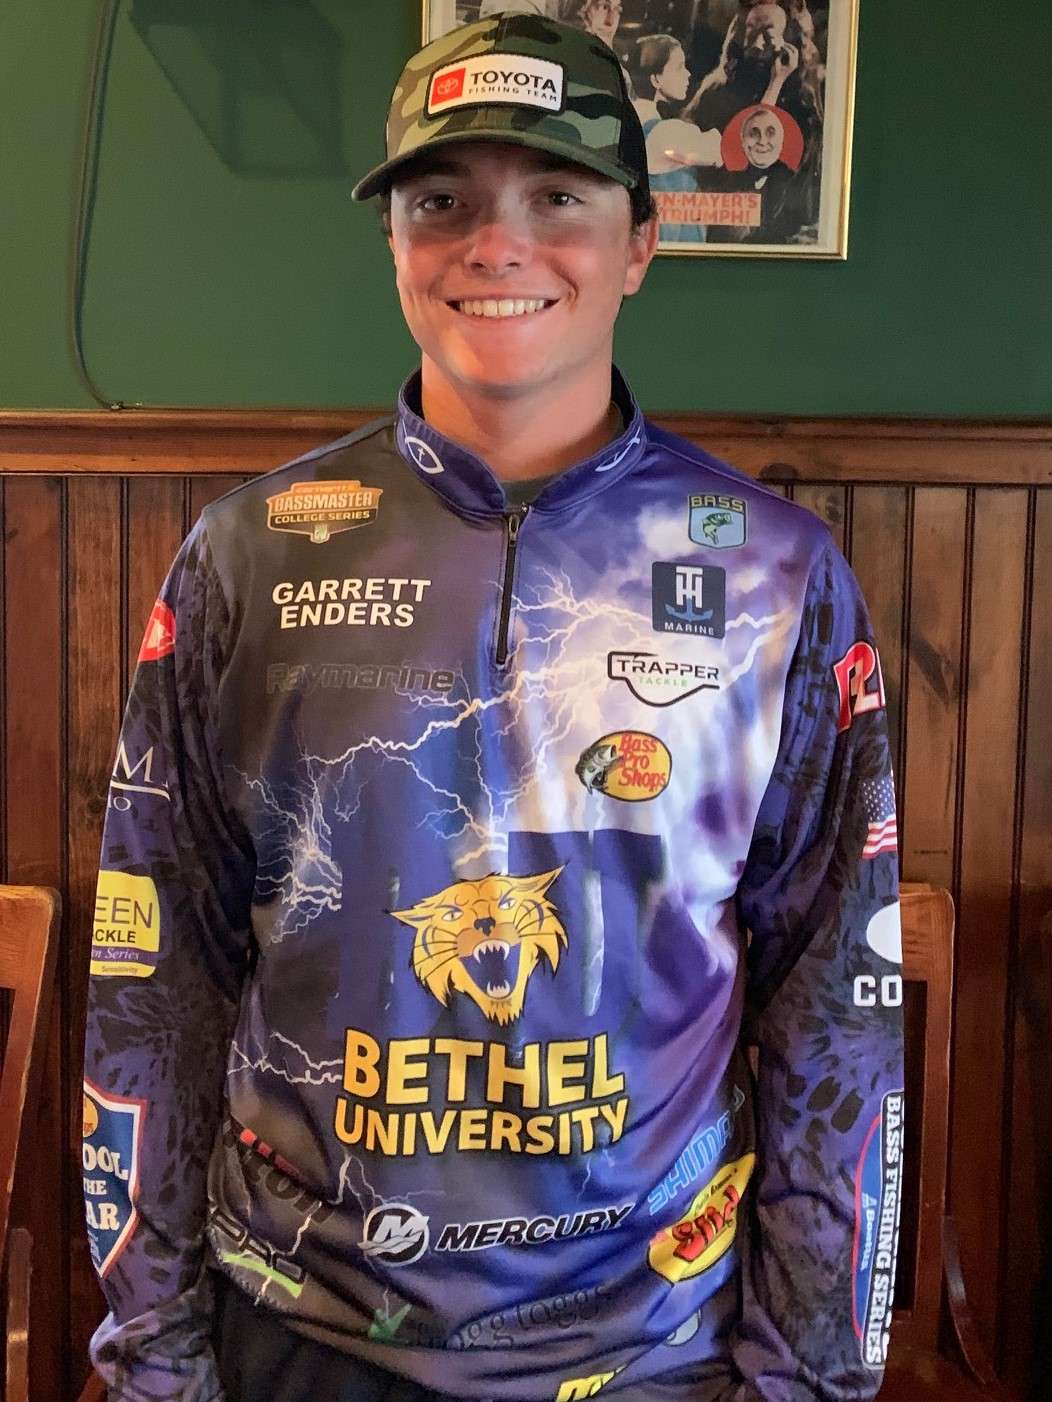 No. 5 seed<BR> Garrett Enders, Bethel <BR> Age: 22. Hometown: Mifflinburg, Penn.<BR> Graduated in spring, Bachelor Degree in Business Management.<BR> Favorite technique: Any type of smallmouth fishing.<BR> Thoughts on Watts Bar: âIâm familiar with it. My partner Cody and I competed in the College Classic there this past spring as well as a recent college face-off event.â<BR> Weight to advance: âIt will take 12 Â½ pounds to win the first round of competition.â<BR> What would it mean to advance to the Bassmaster Classic? âIt would mean everything to win an event that is as prestigious as (the College Classic Bracket.) I would like to pursue bass fishing as a career and this tournament has opened so many doors for past college anglers. It also allow us as competitors to experience what it try is like to be a professional angler.â